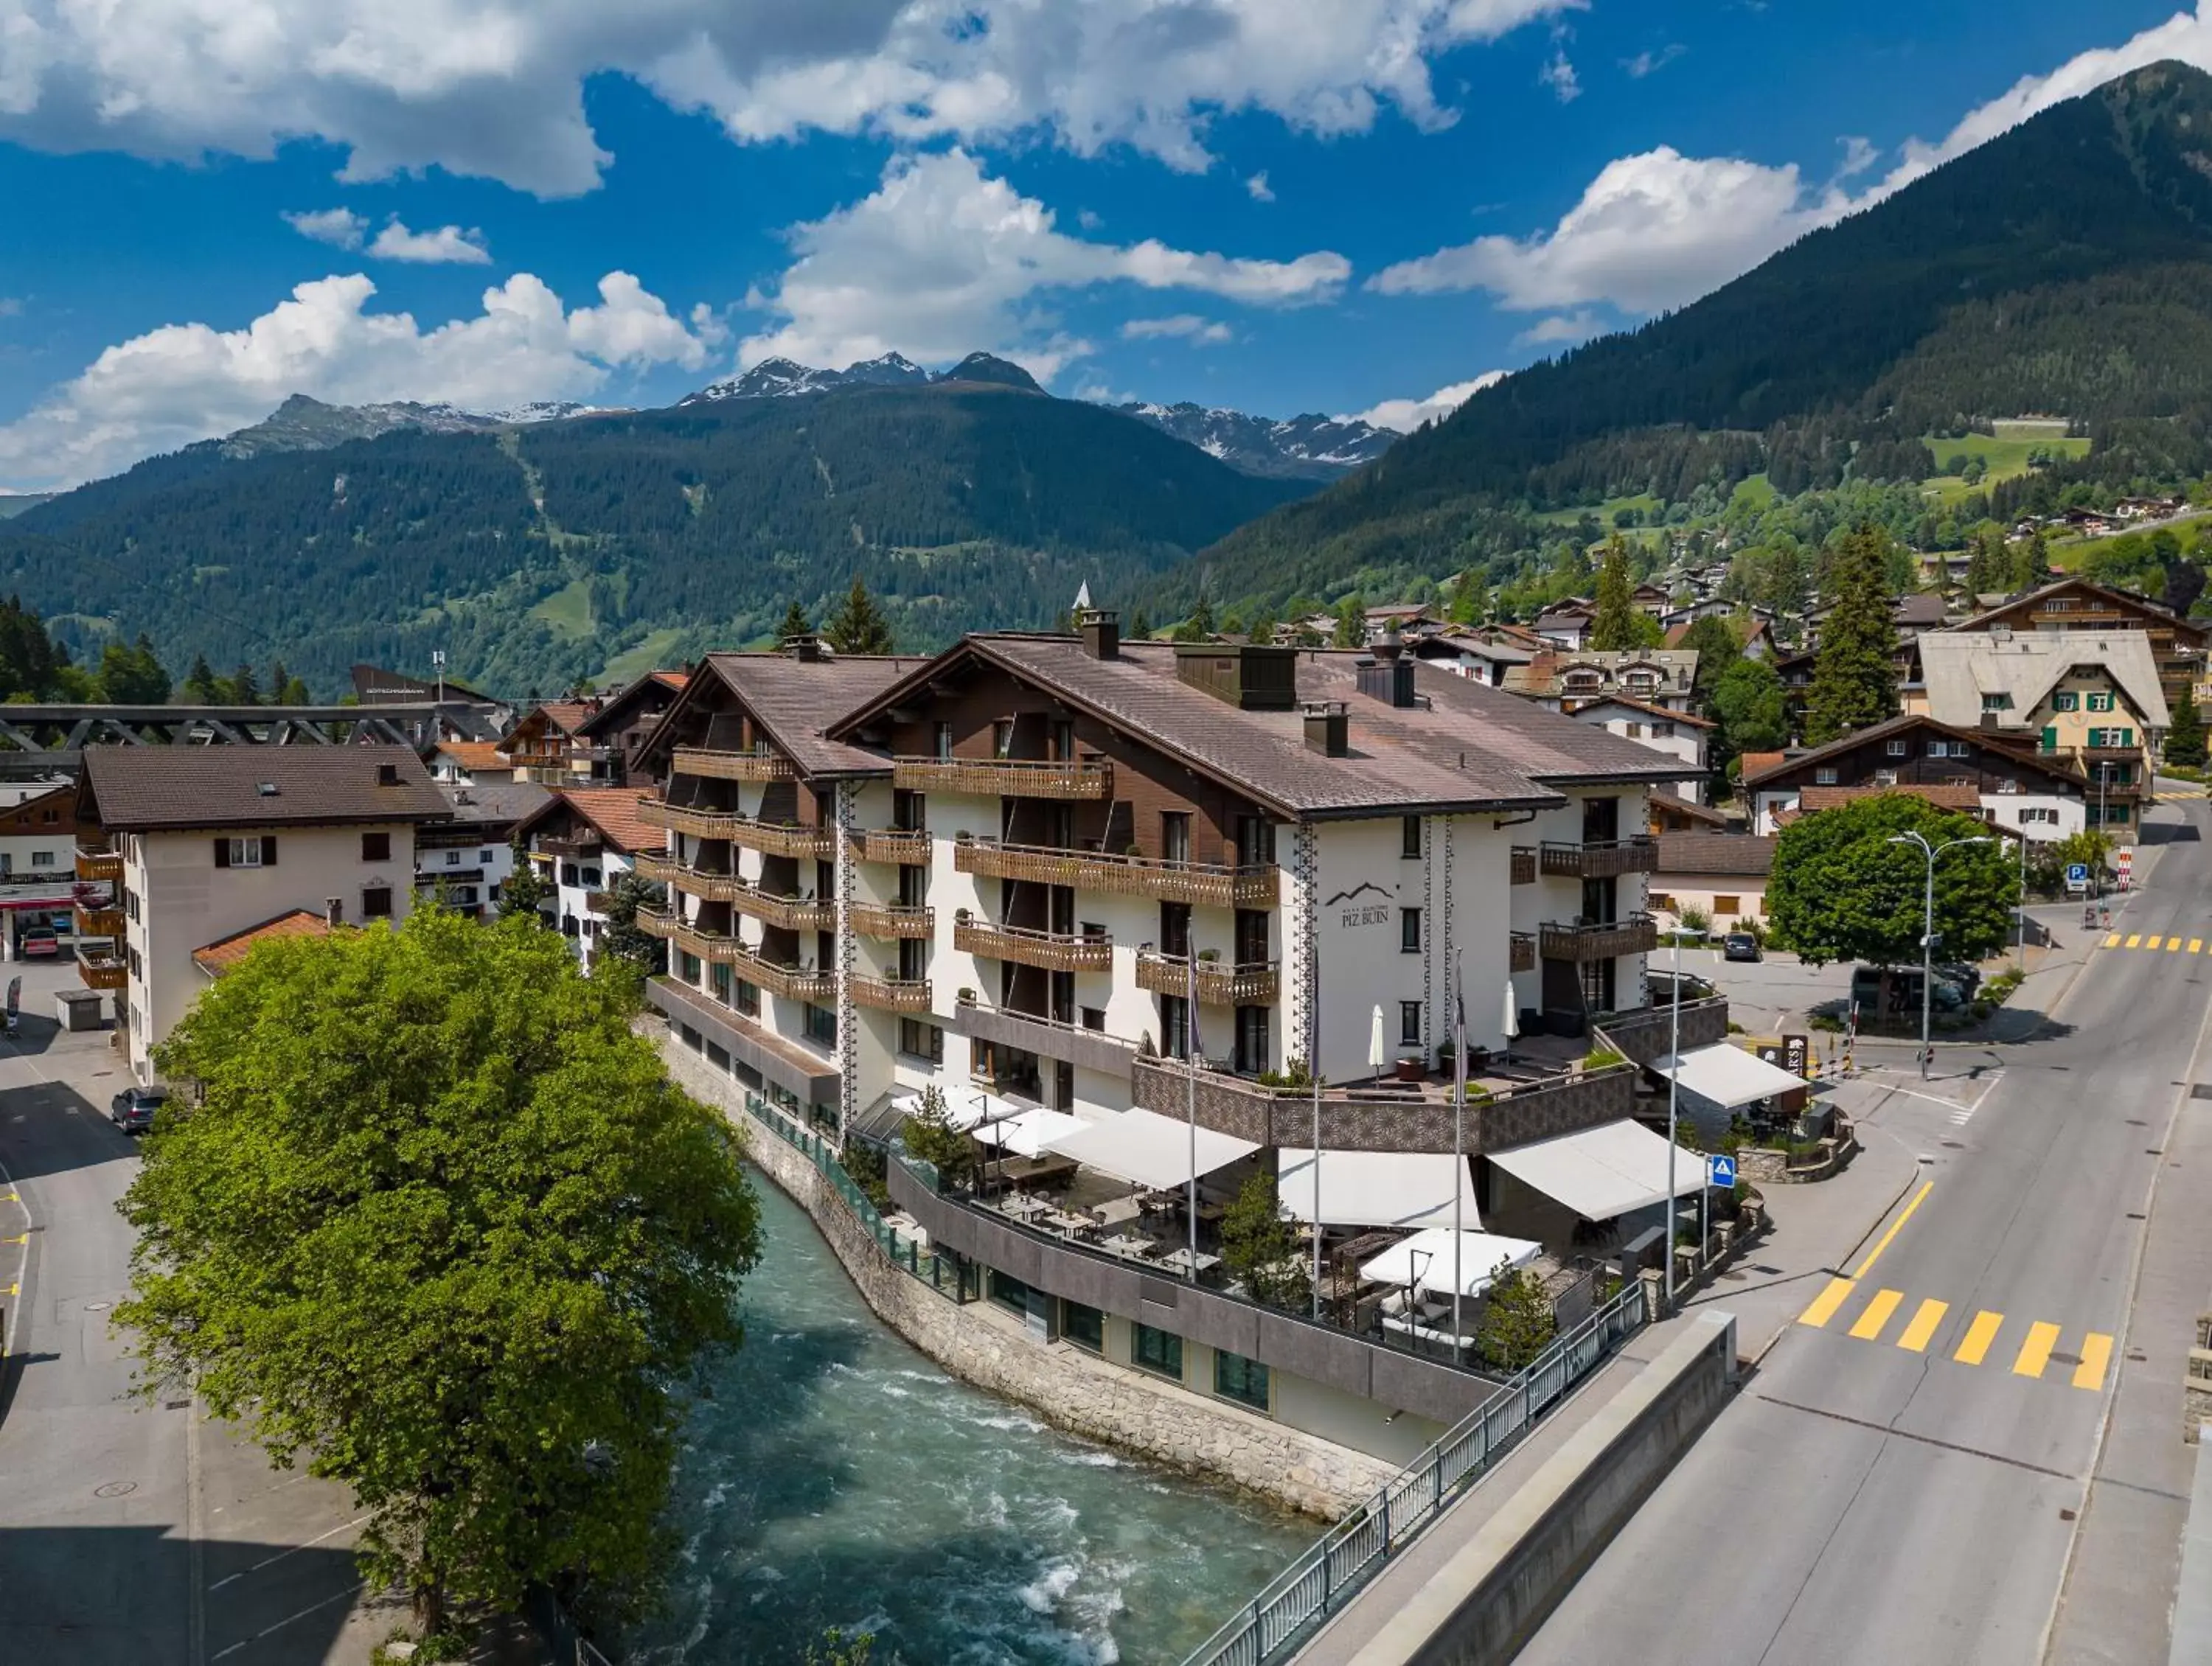 Property building in Hotel Piz Buin Klosters